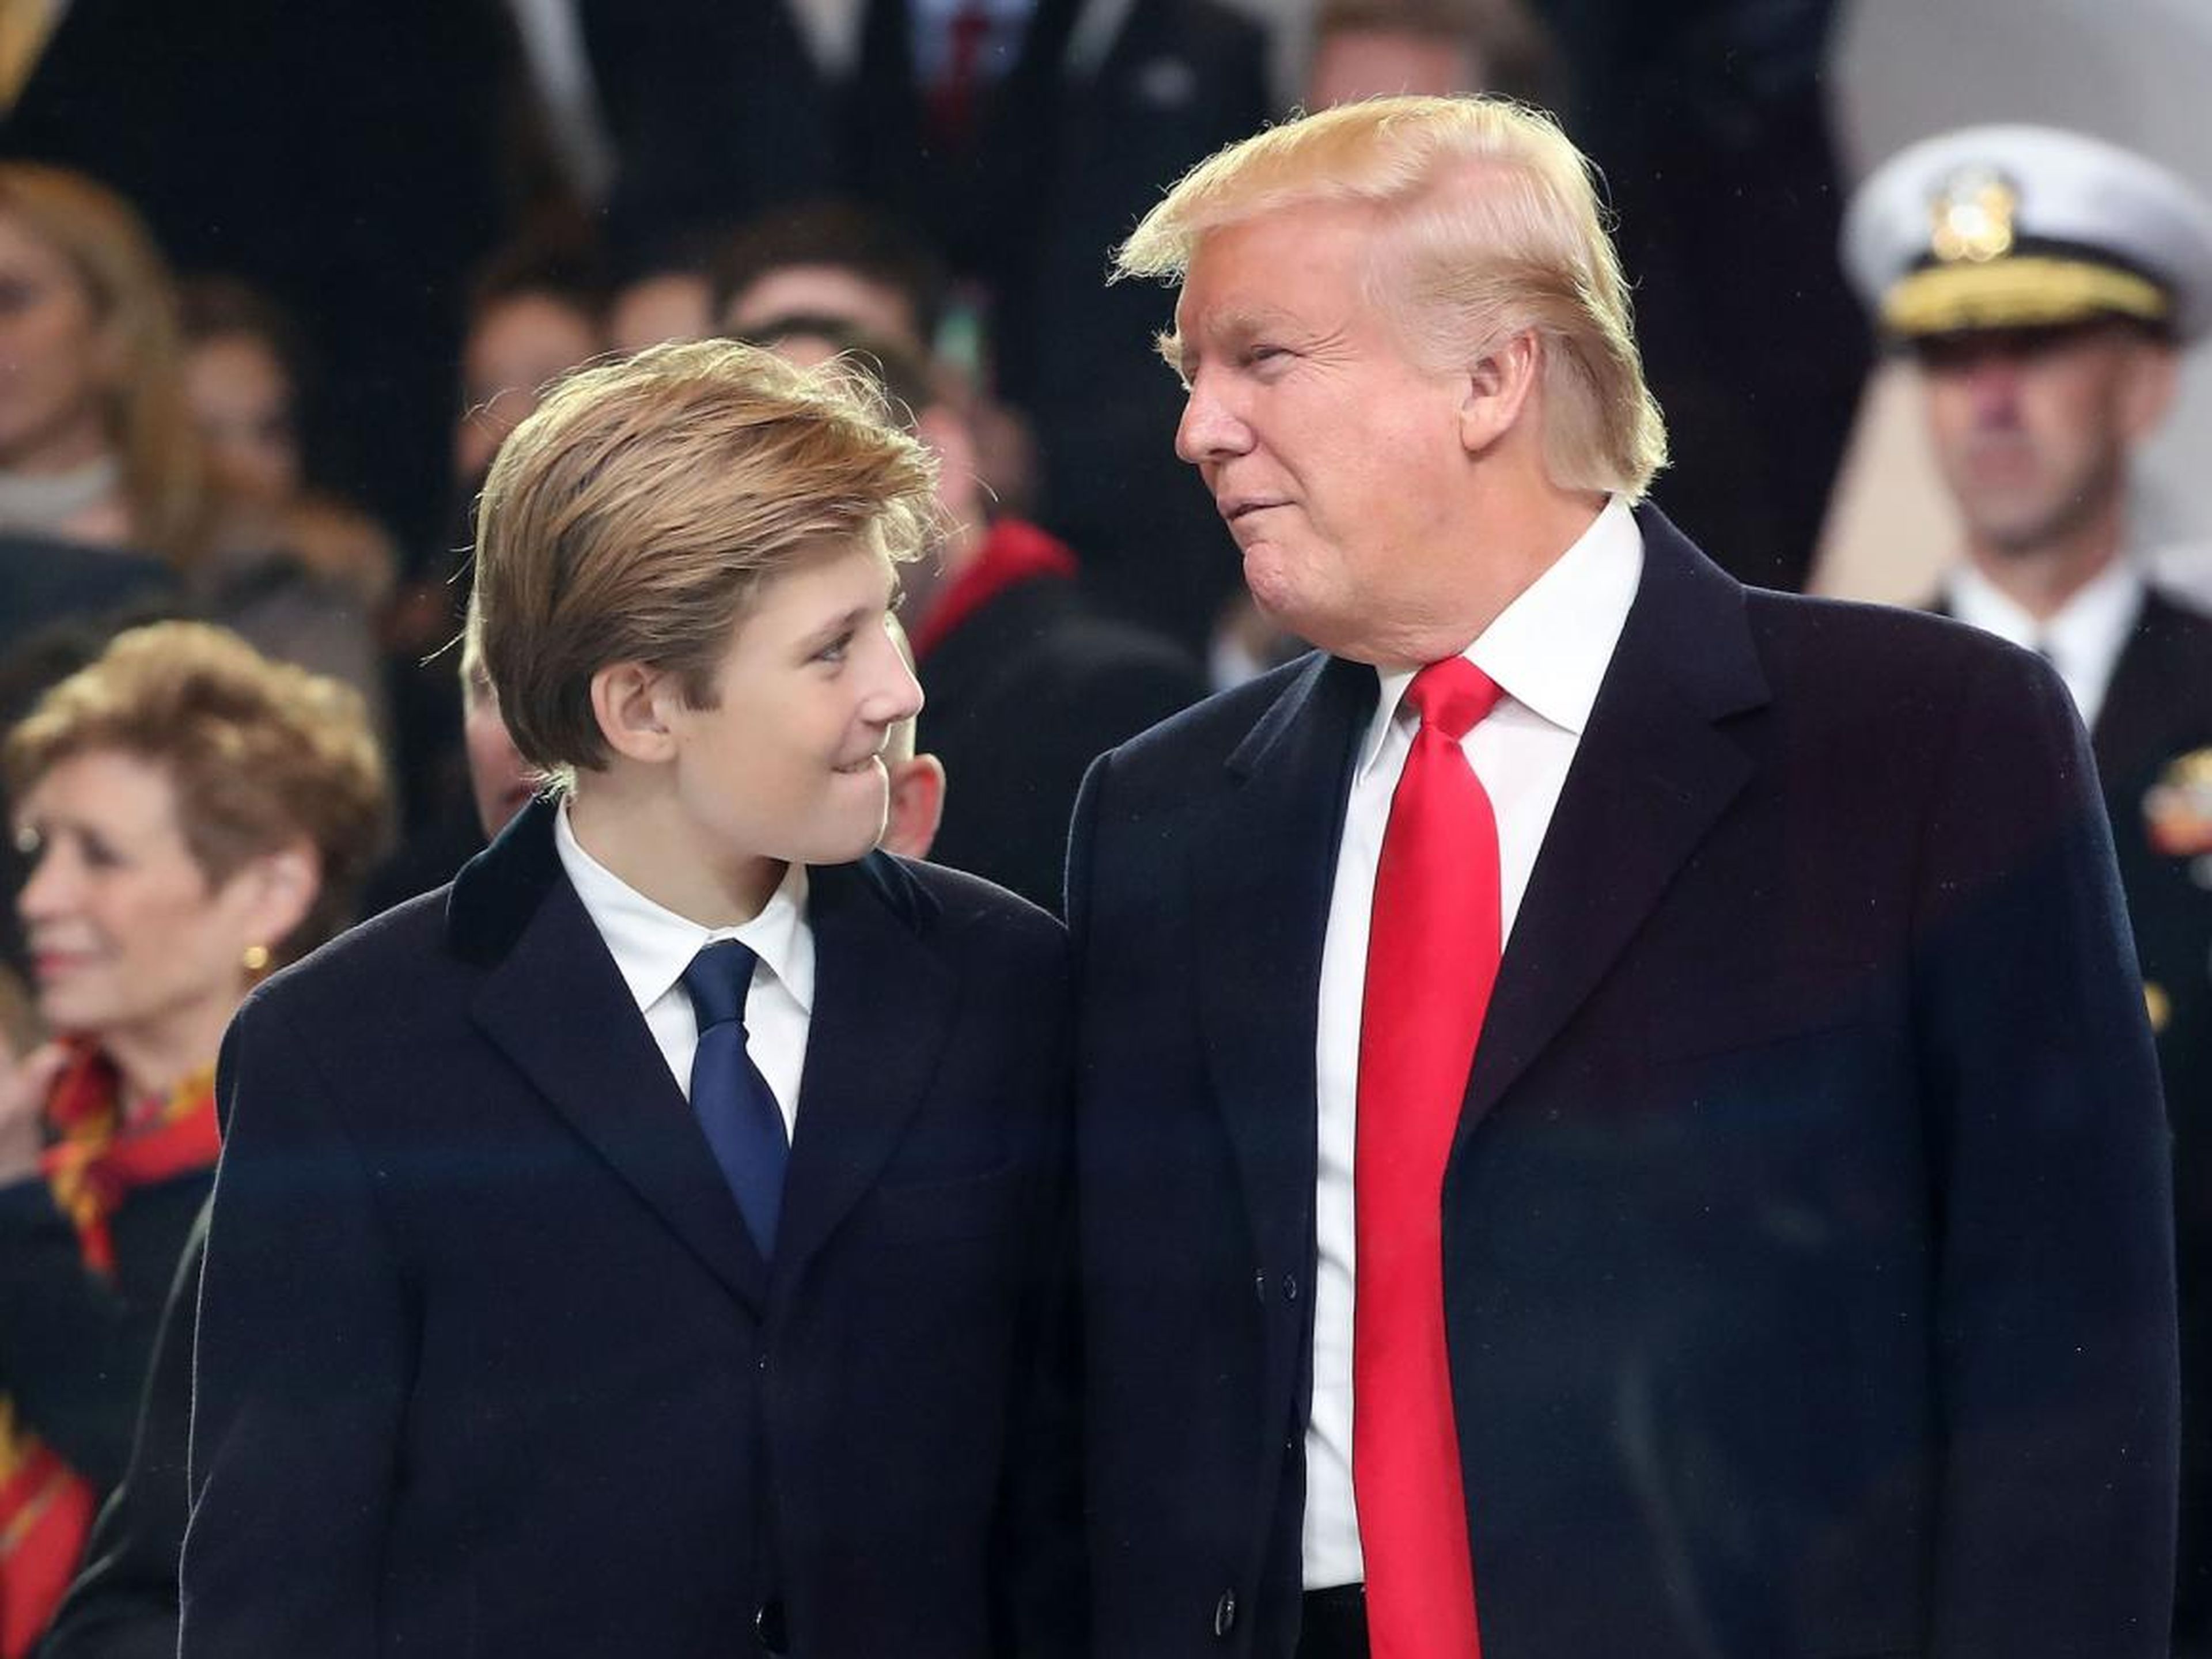 In New York, Barron was attending Columbia Grammar and Preparatory School, which cost $40,000 a year. Now, he attends St. Andrew's Episcopal School in Maryland, which also costs $40,000 a year.